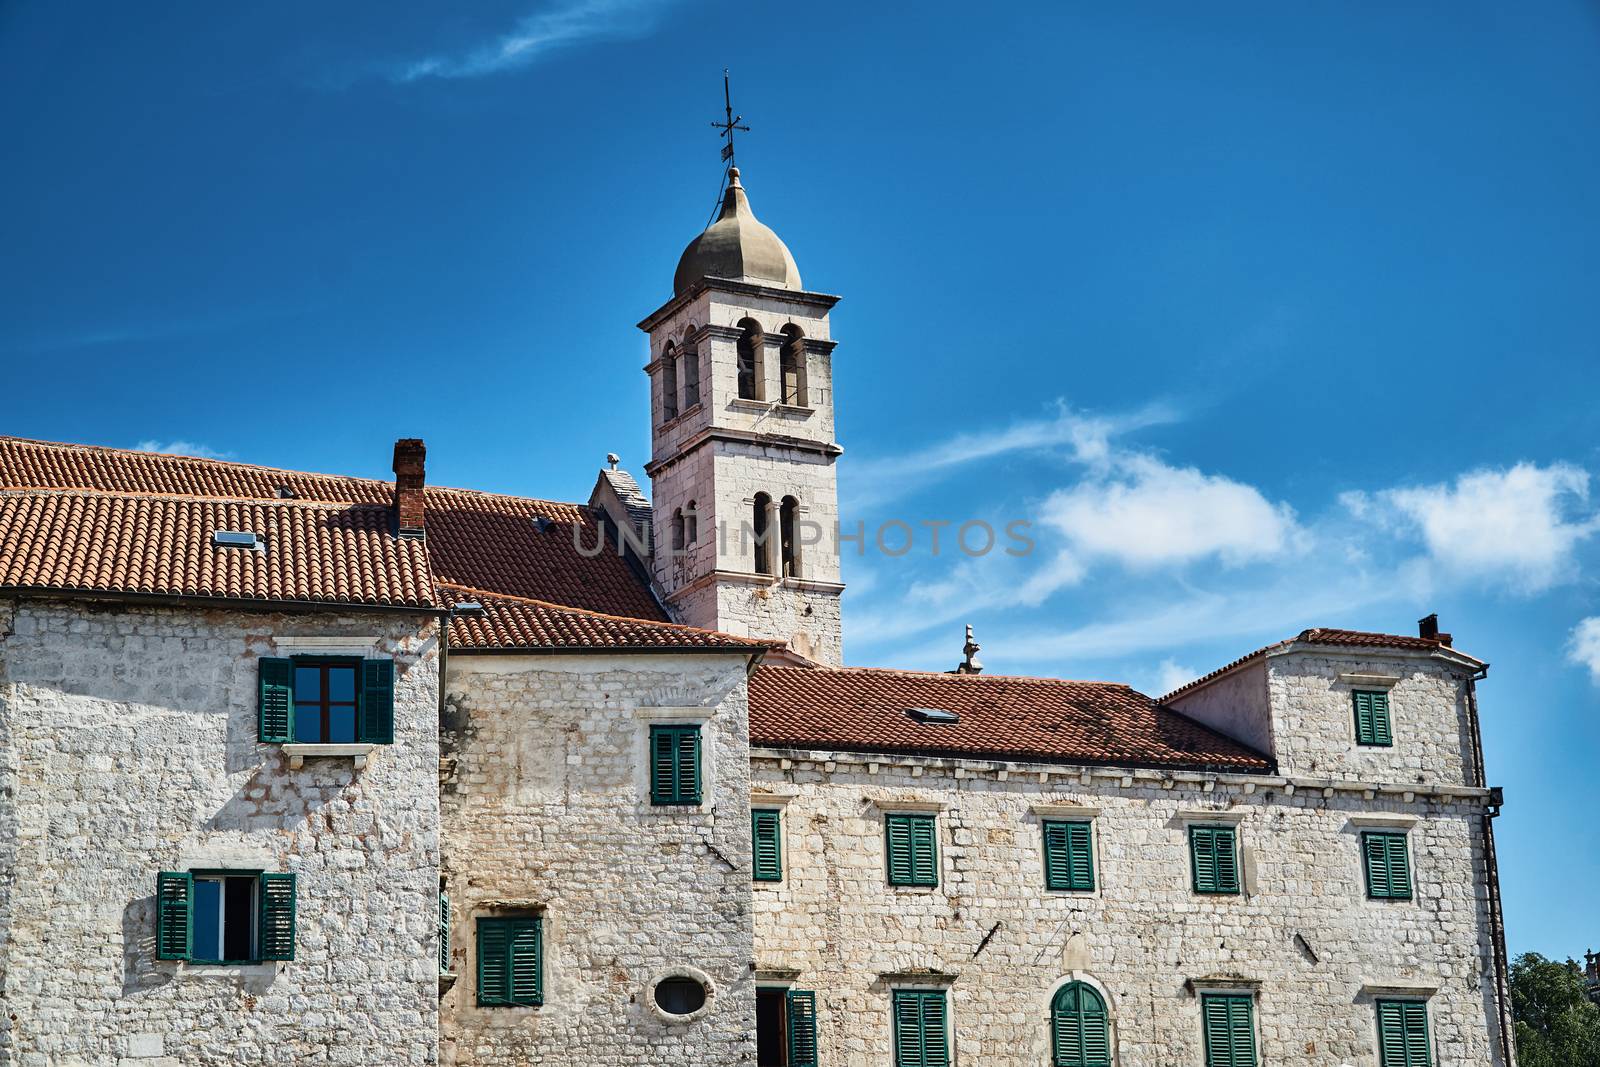 stone houses and church bell tower in the city of Sibenik in Croatia